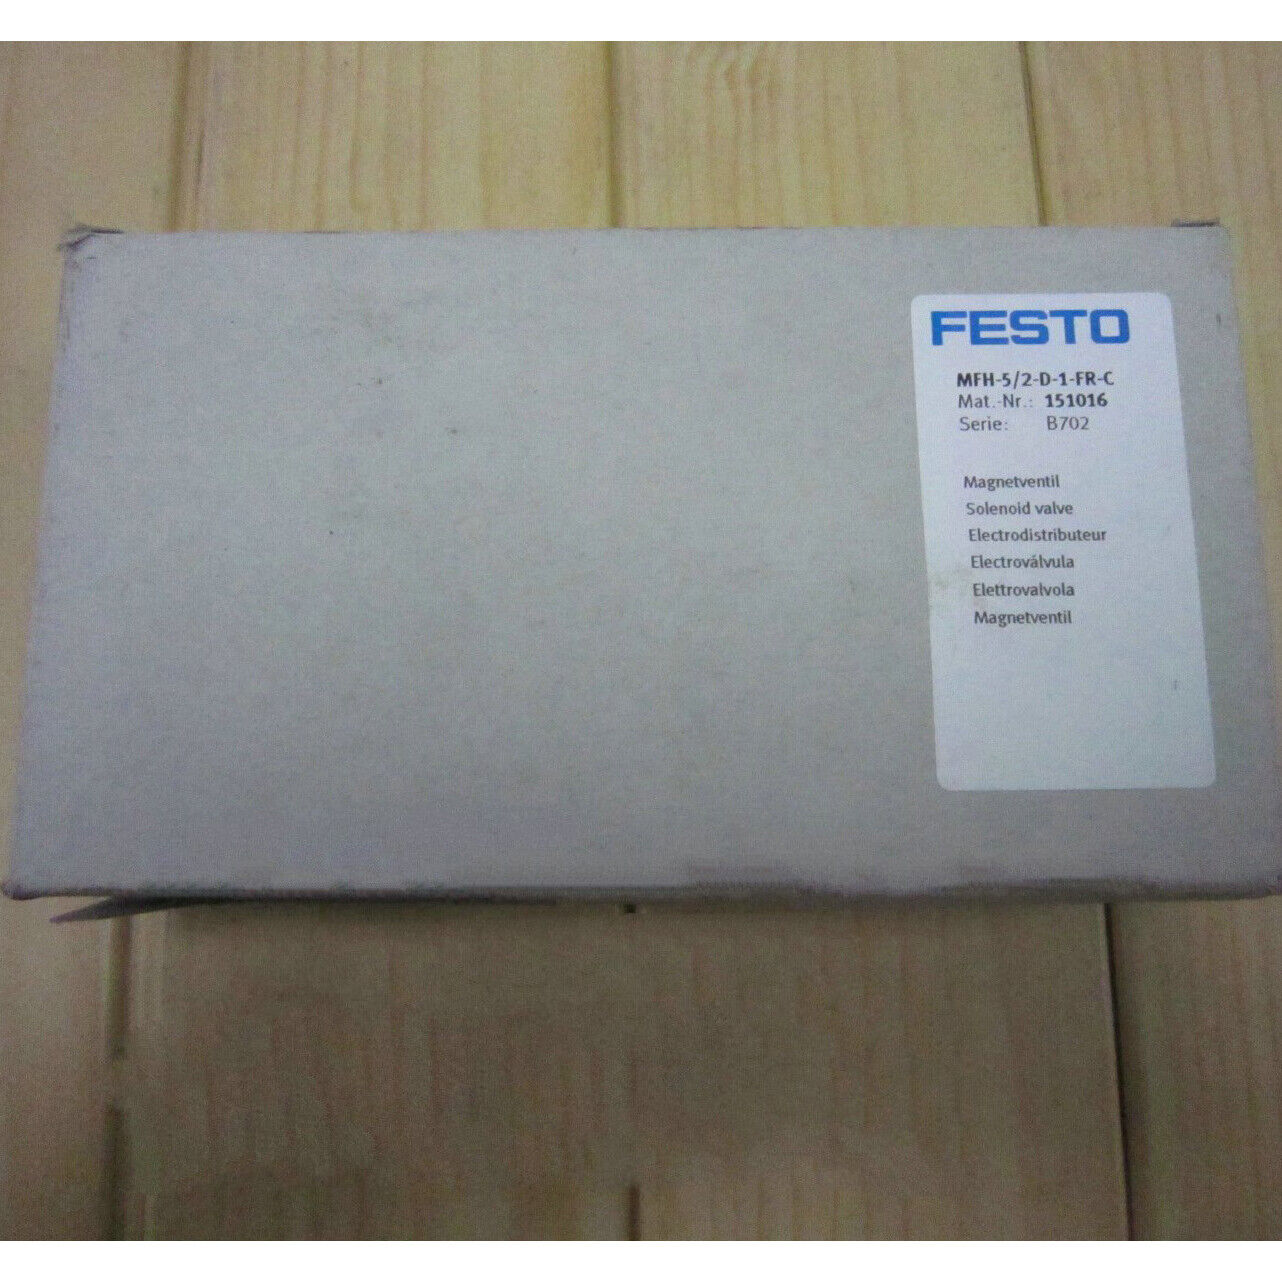 one New for Festo Solenoid Valve MFH-5/2-D-1-FR-C 151016 Fast Delivery